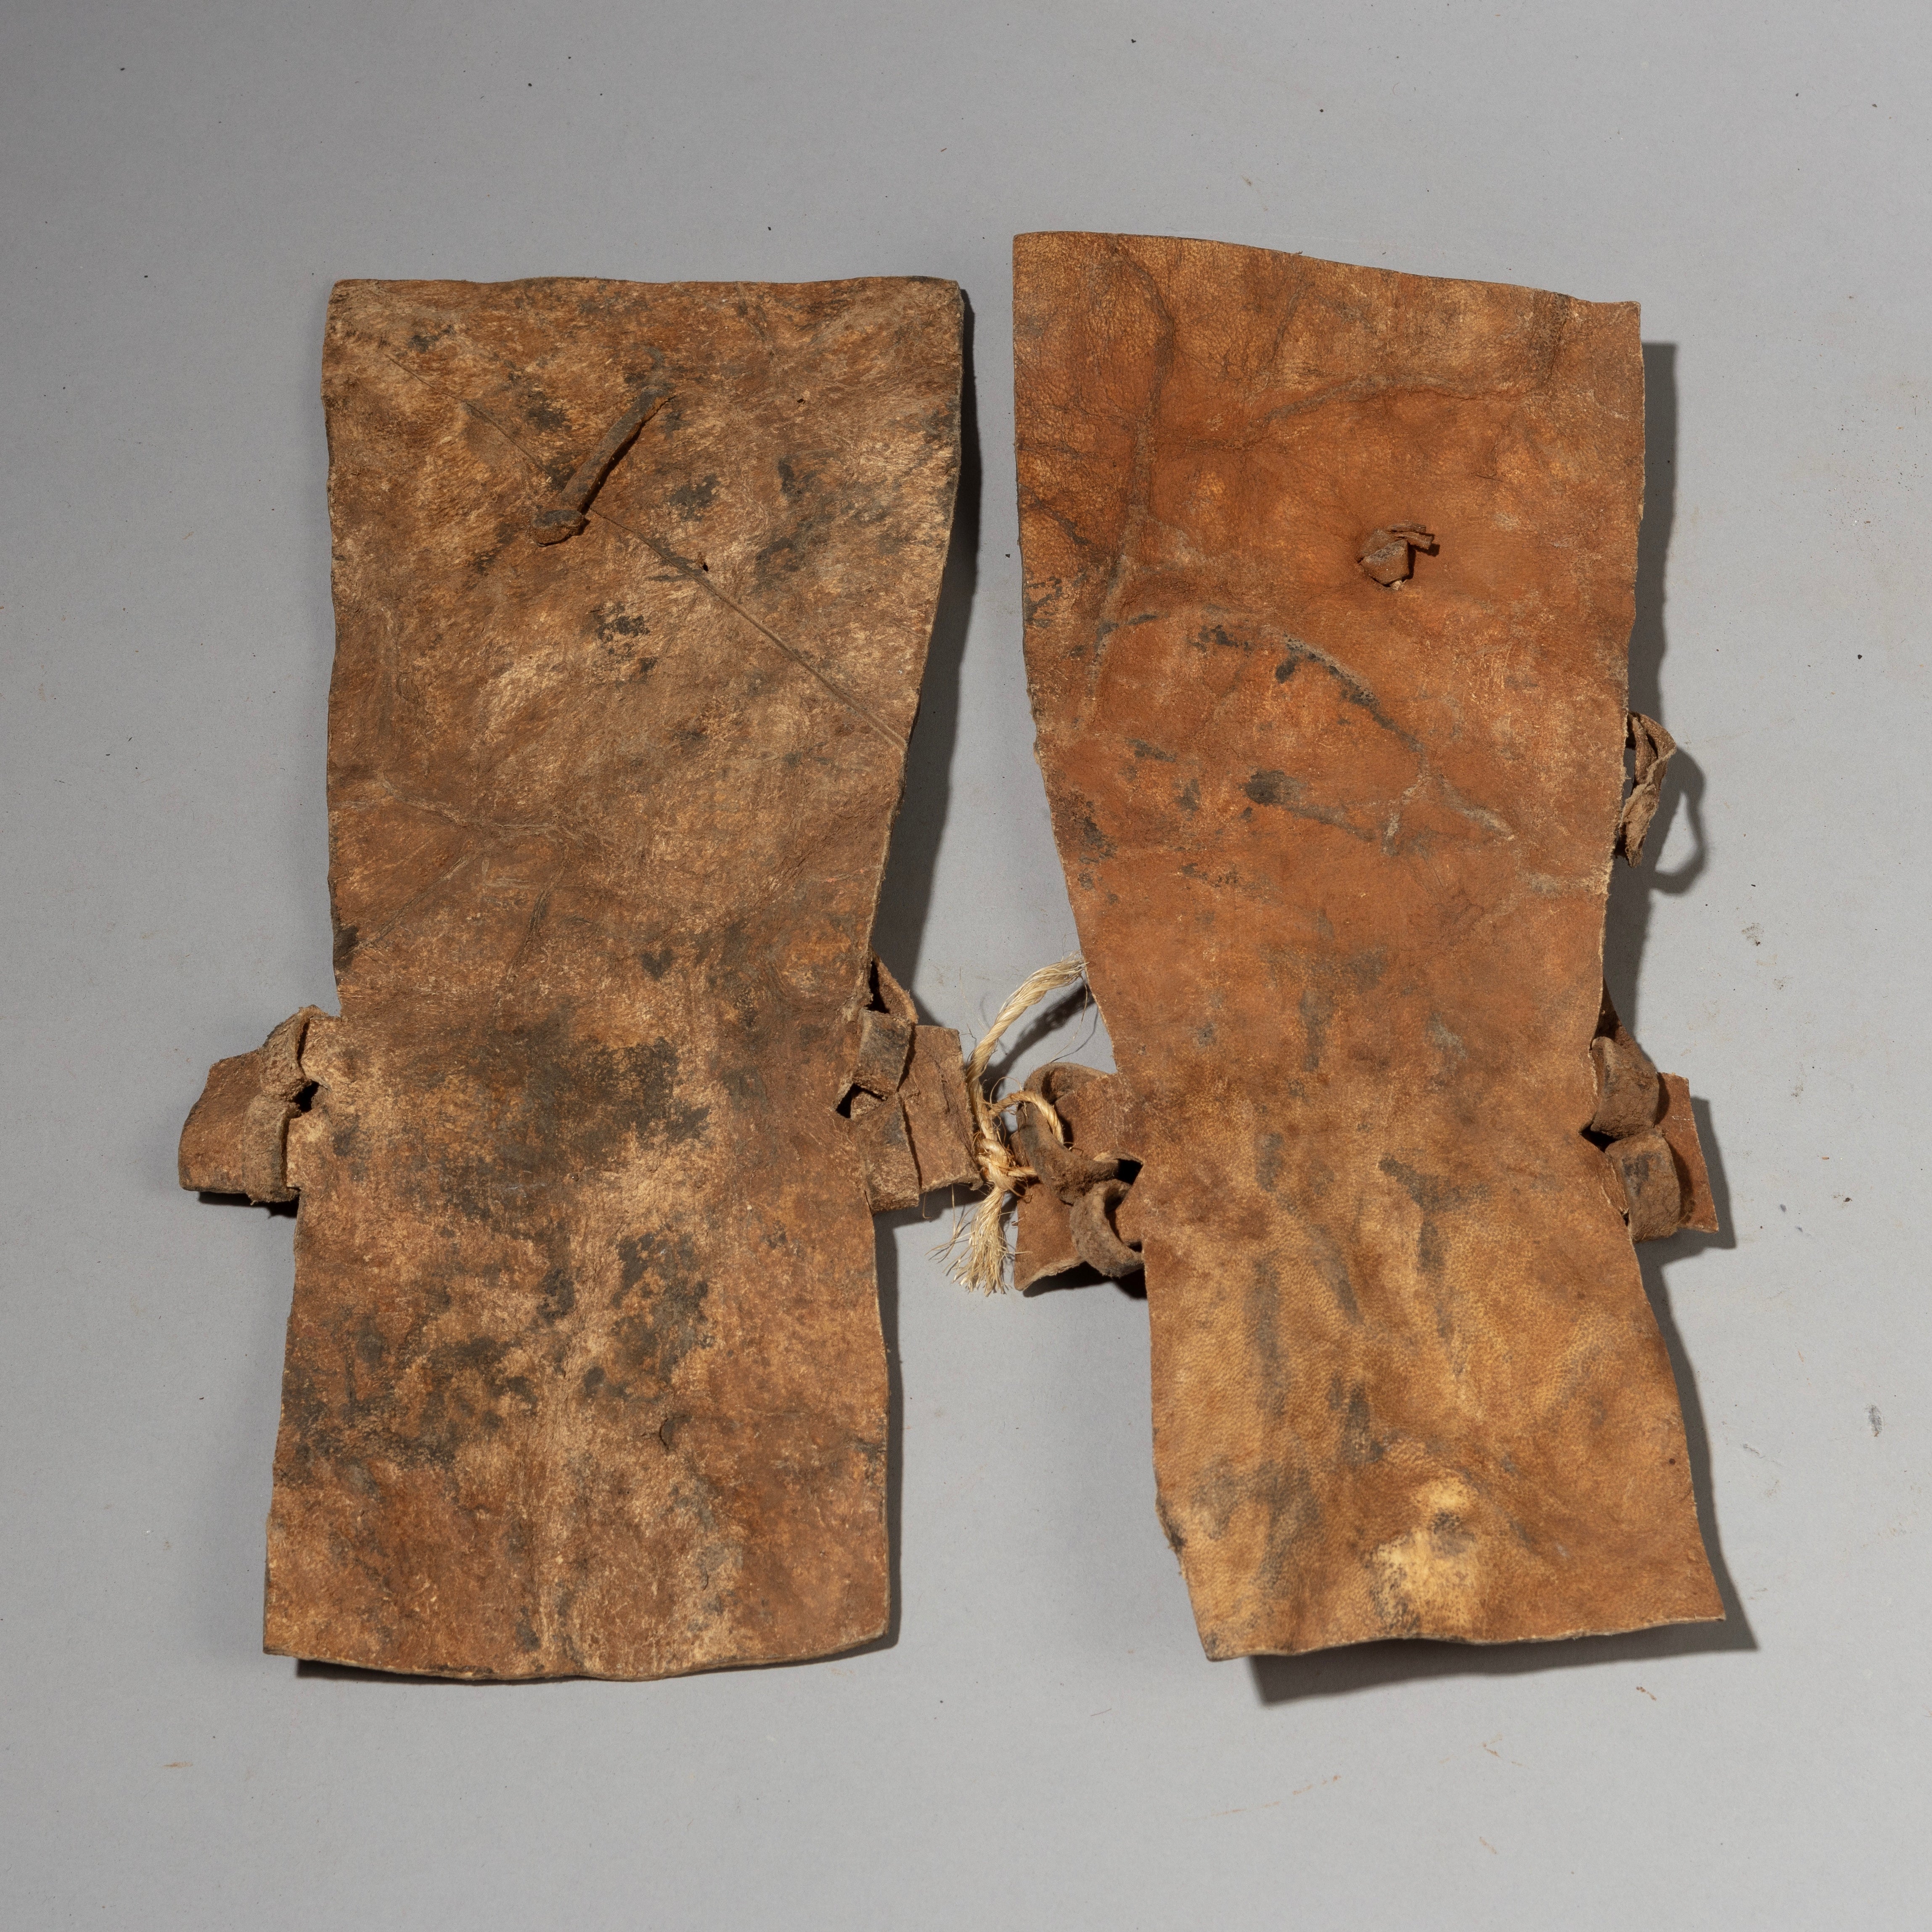 A SIMPLE PAIR OF LEATHER SHOES FROM AFRICA, EX UK COLL.( No 2141)